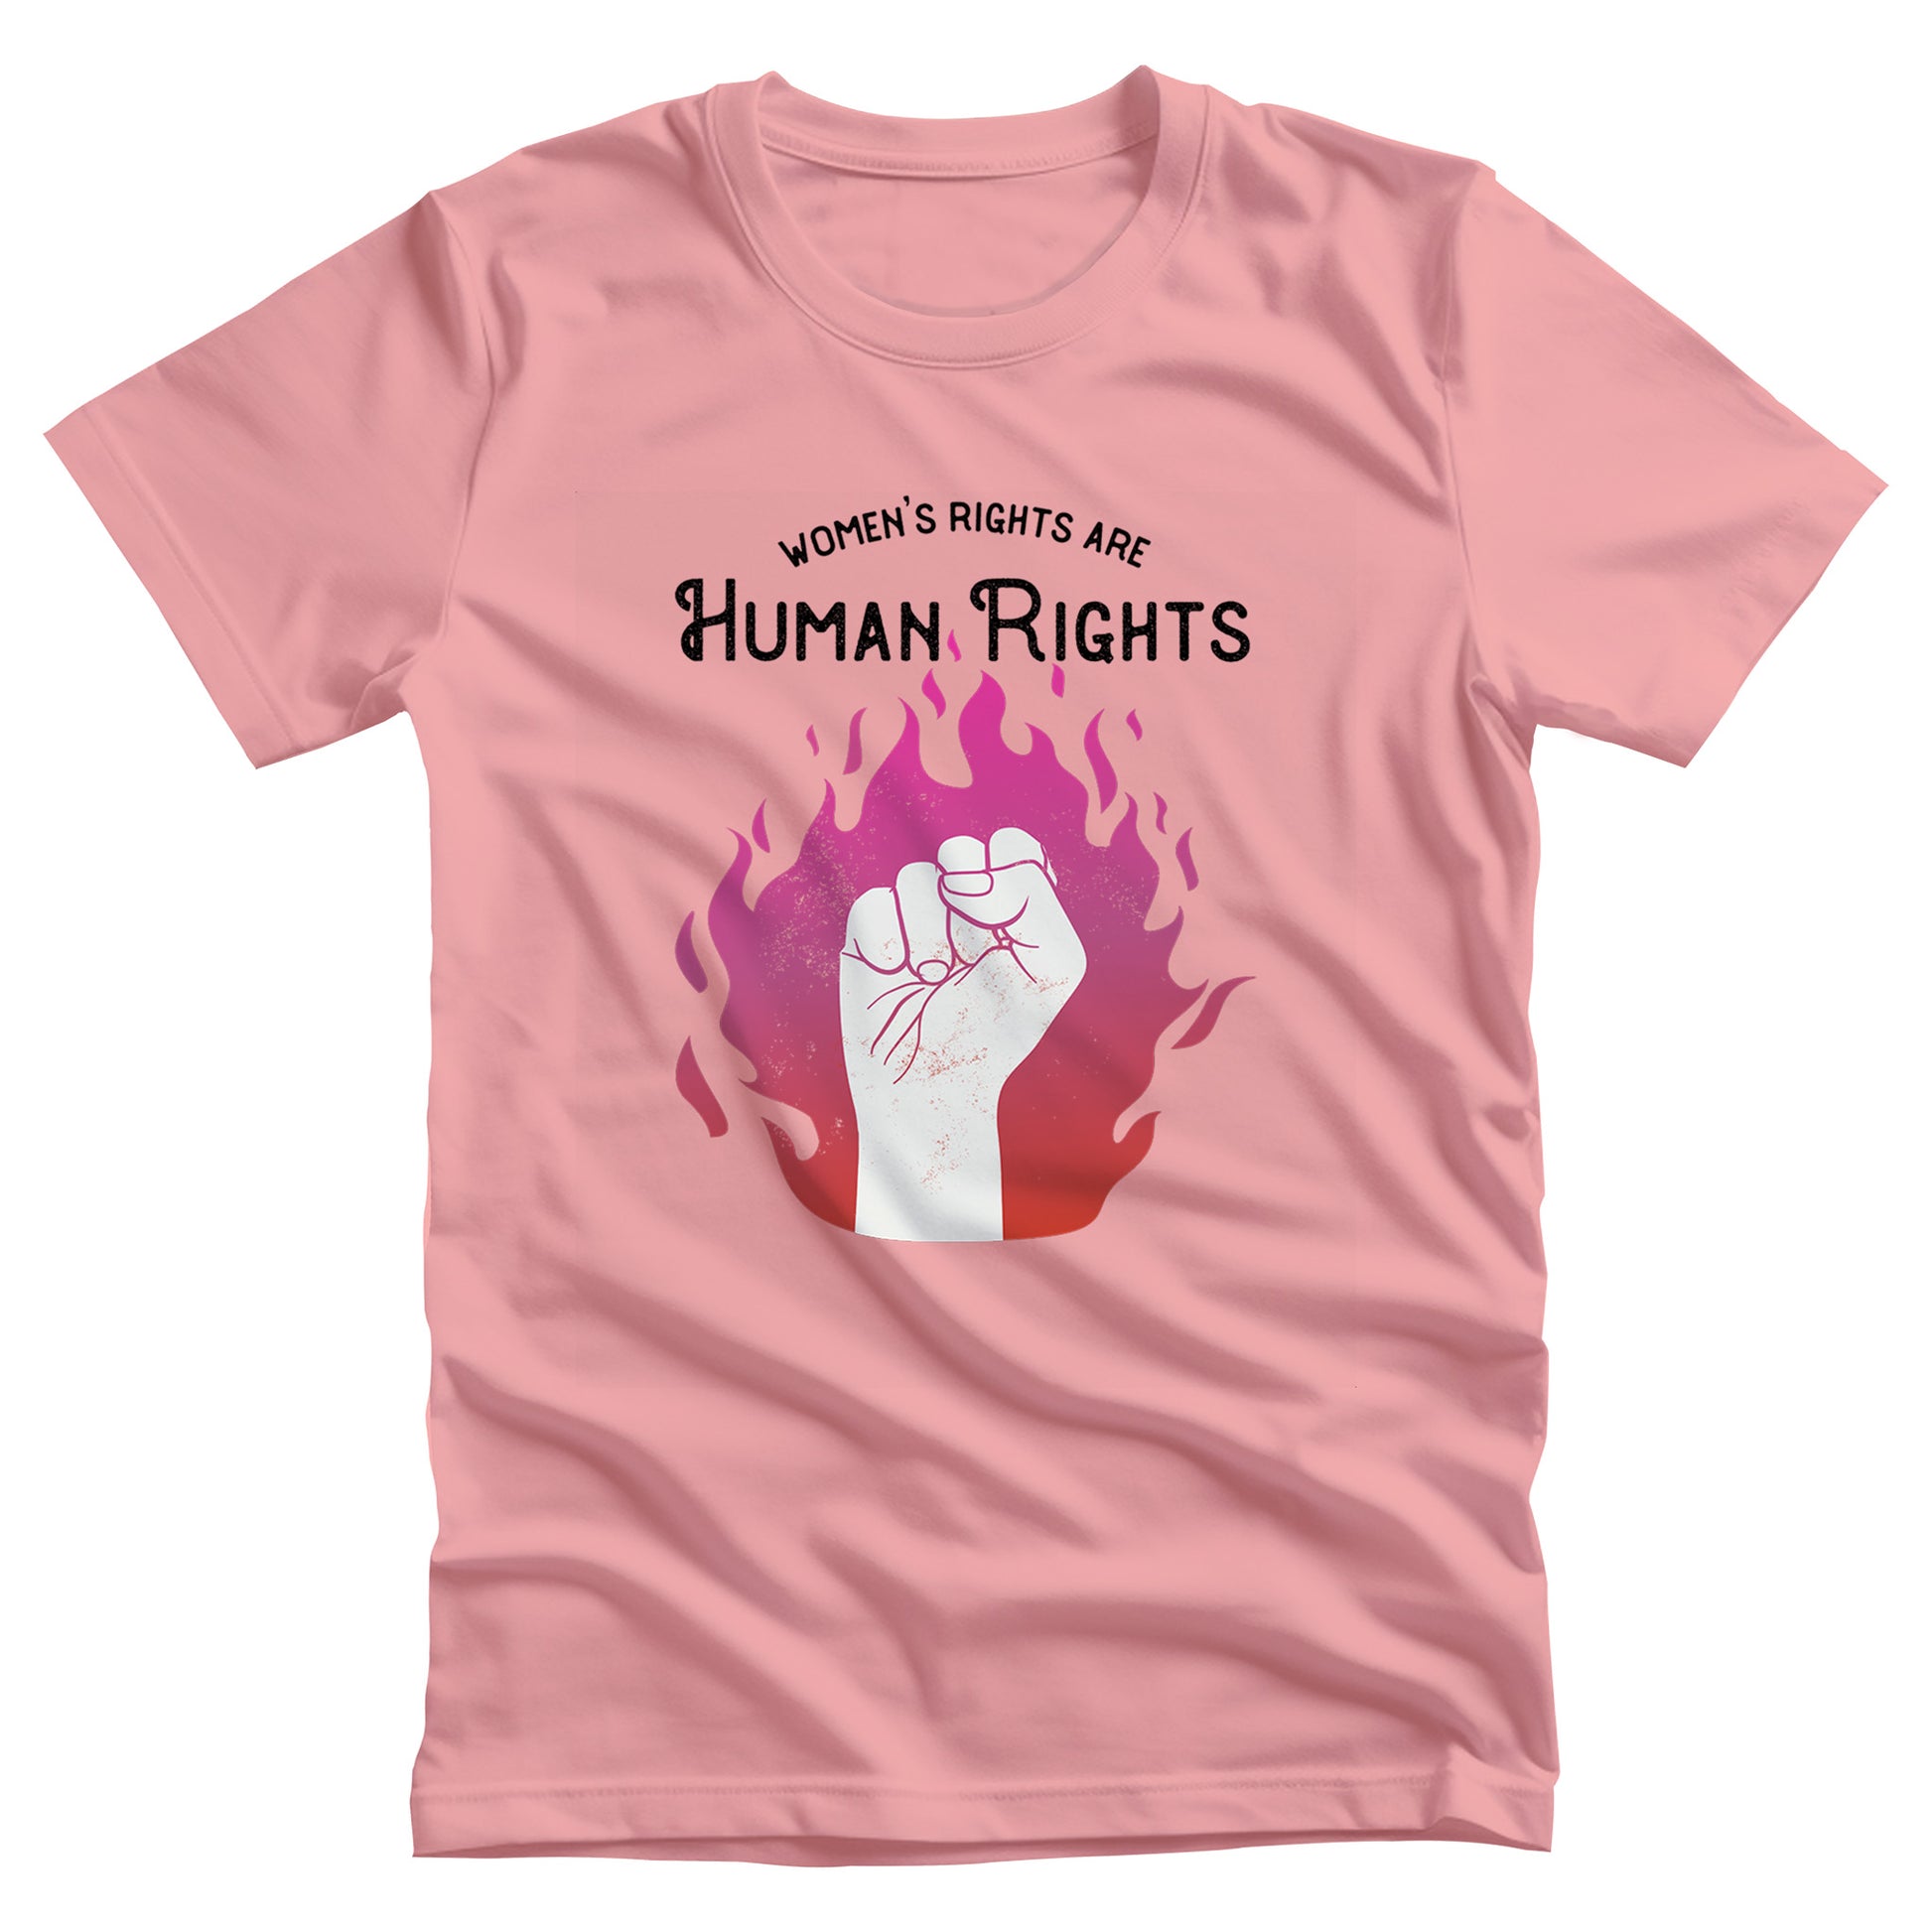 Pink unisex t-shirt with a graphic of a fist over pink and red flames. The text says, “Women’s rights are human rights” with the words “women’s rights are” arched over the words “Human Rights”.